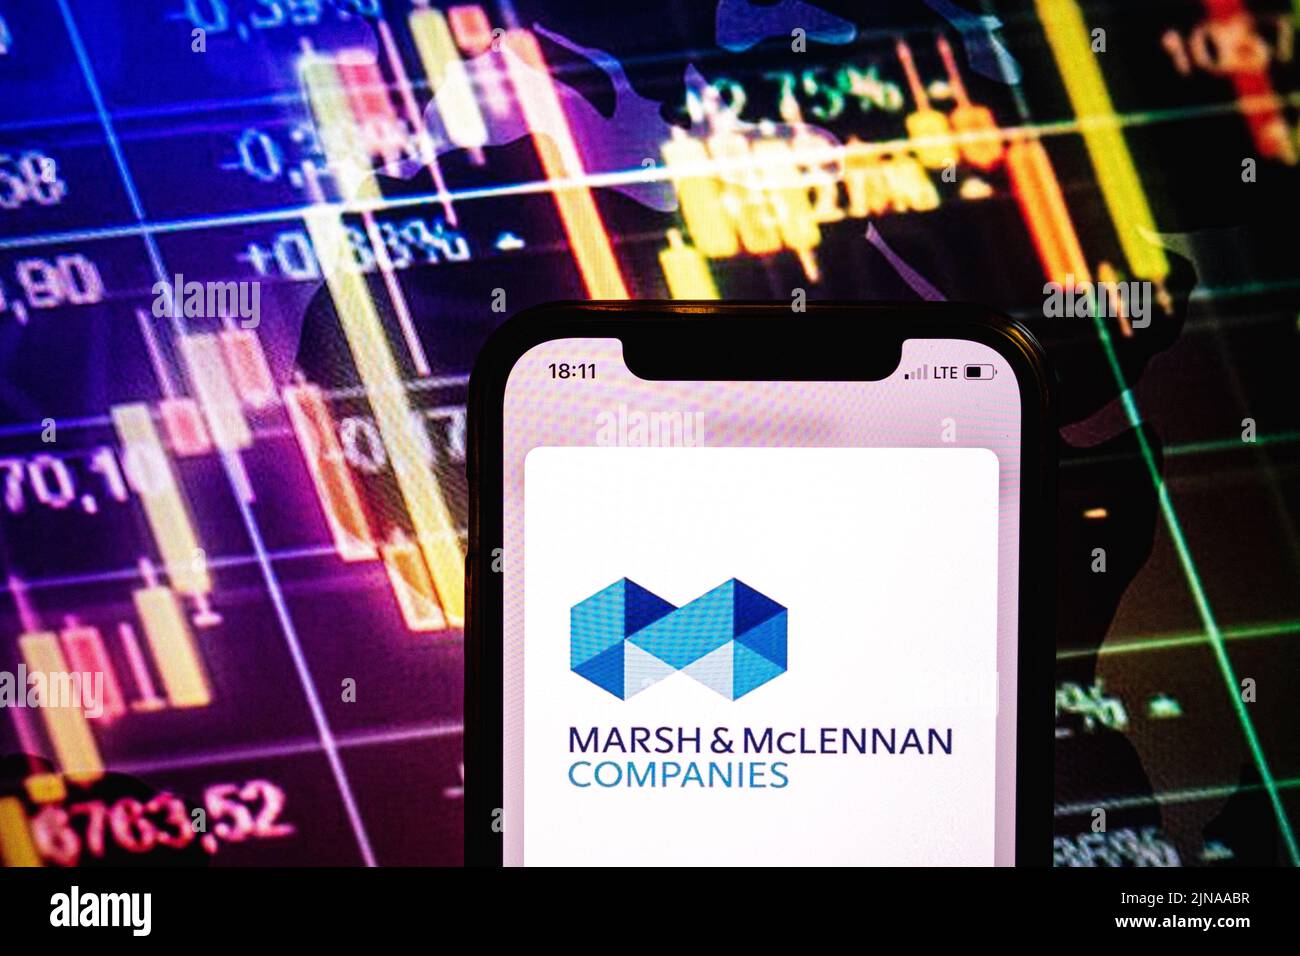 KONSKIE, POLAND - August 09, 2022: Smartphone displaying logo of Marsh and McLennan Companies on stock exchange diagram background Stock Photo